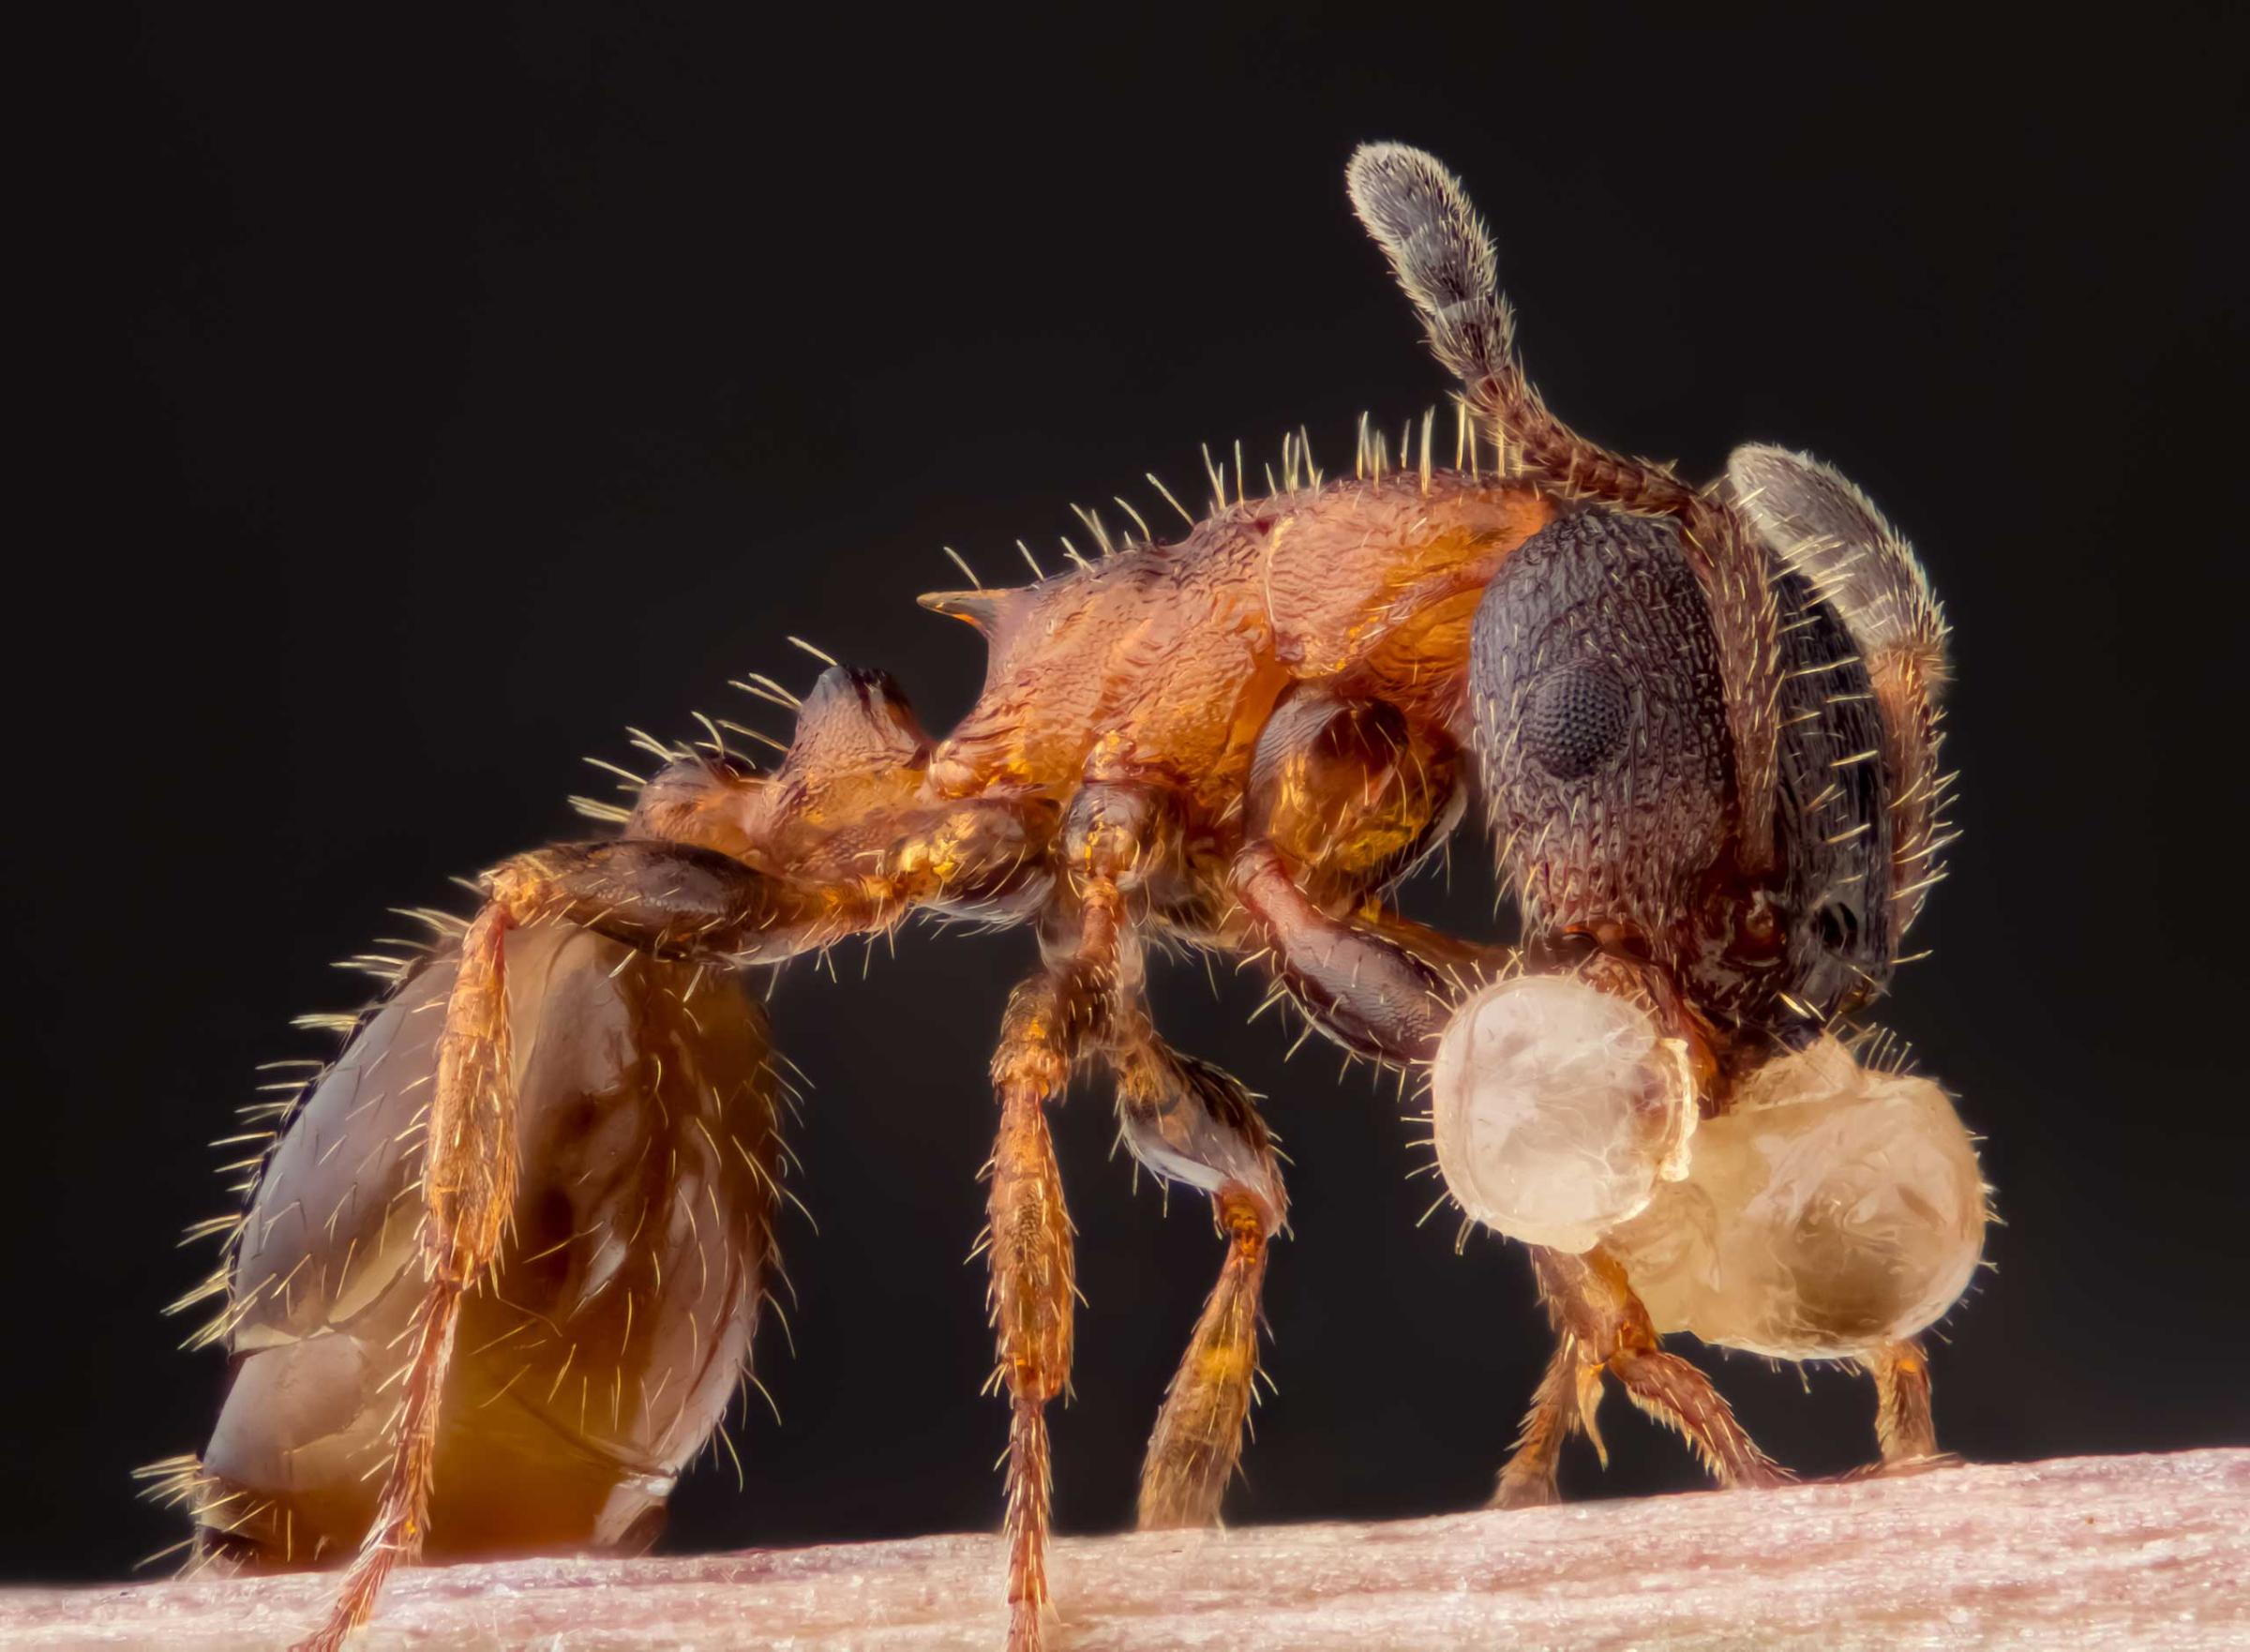 Leptothorax acervorum (ant) carrying its larva